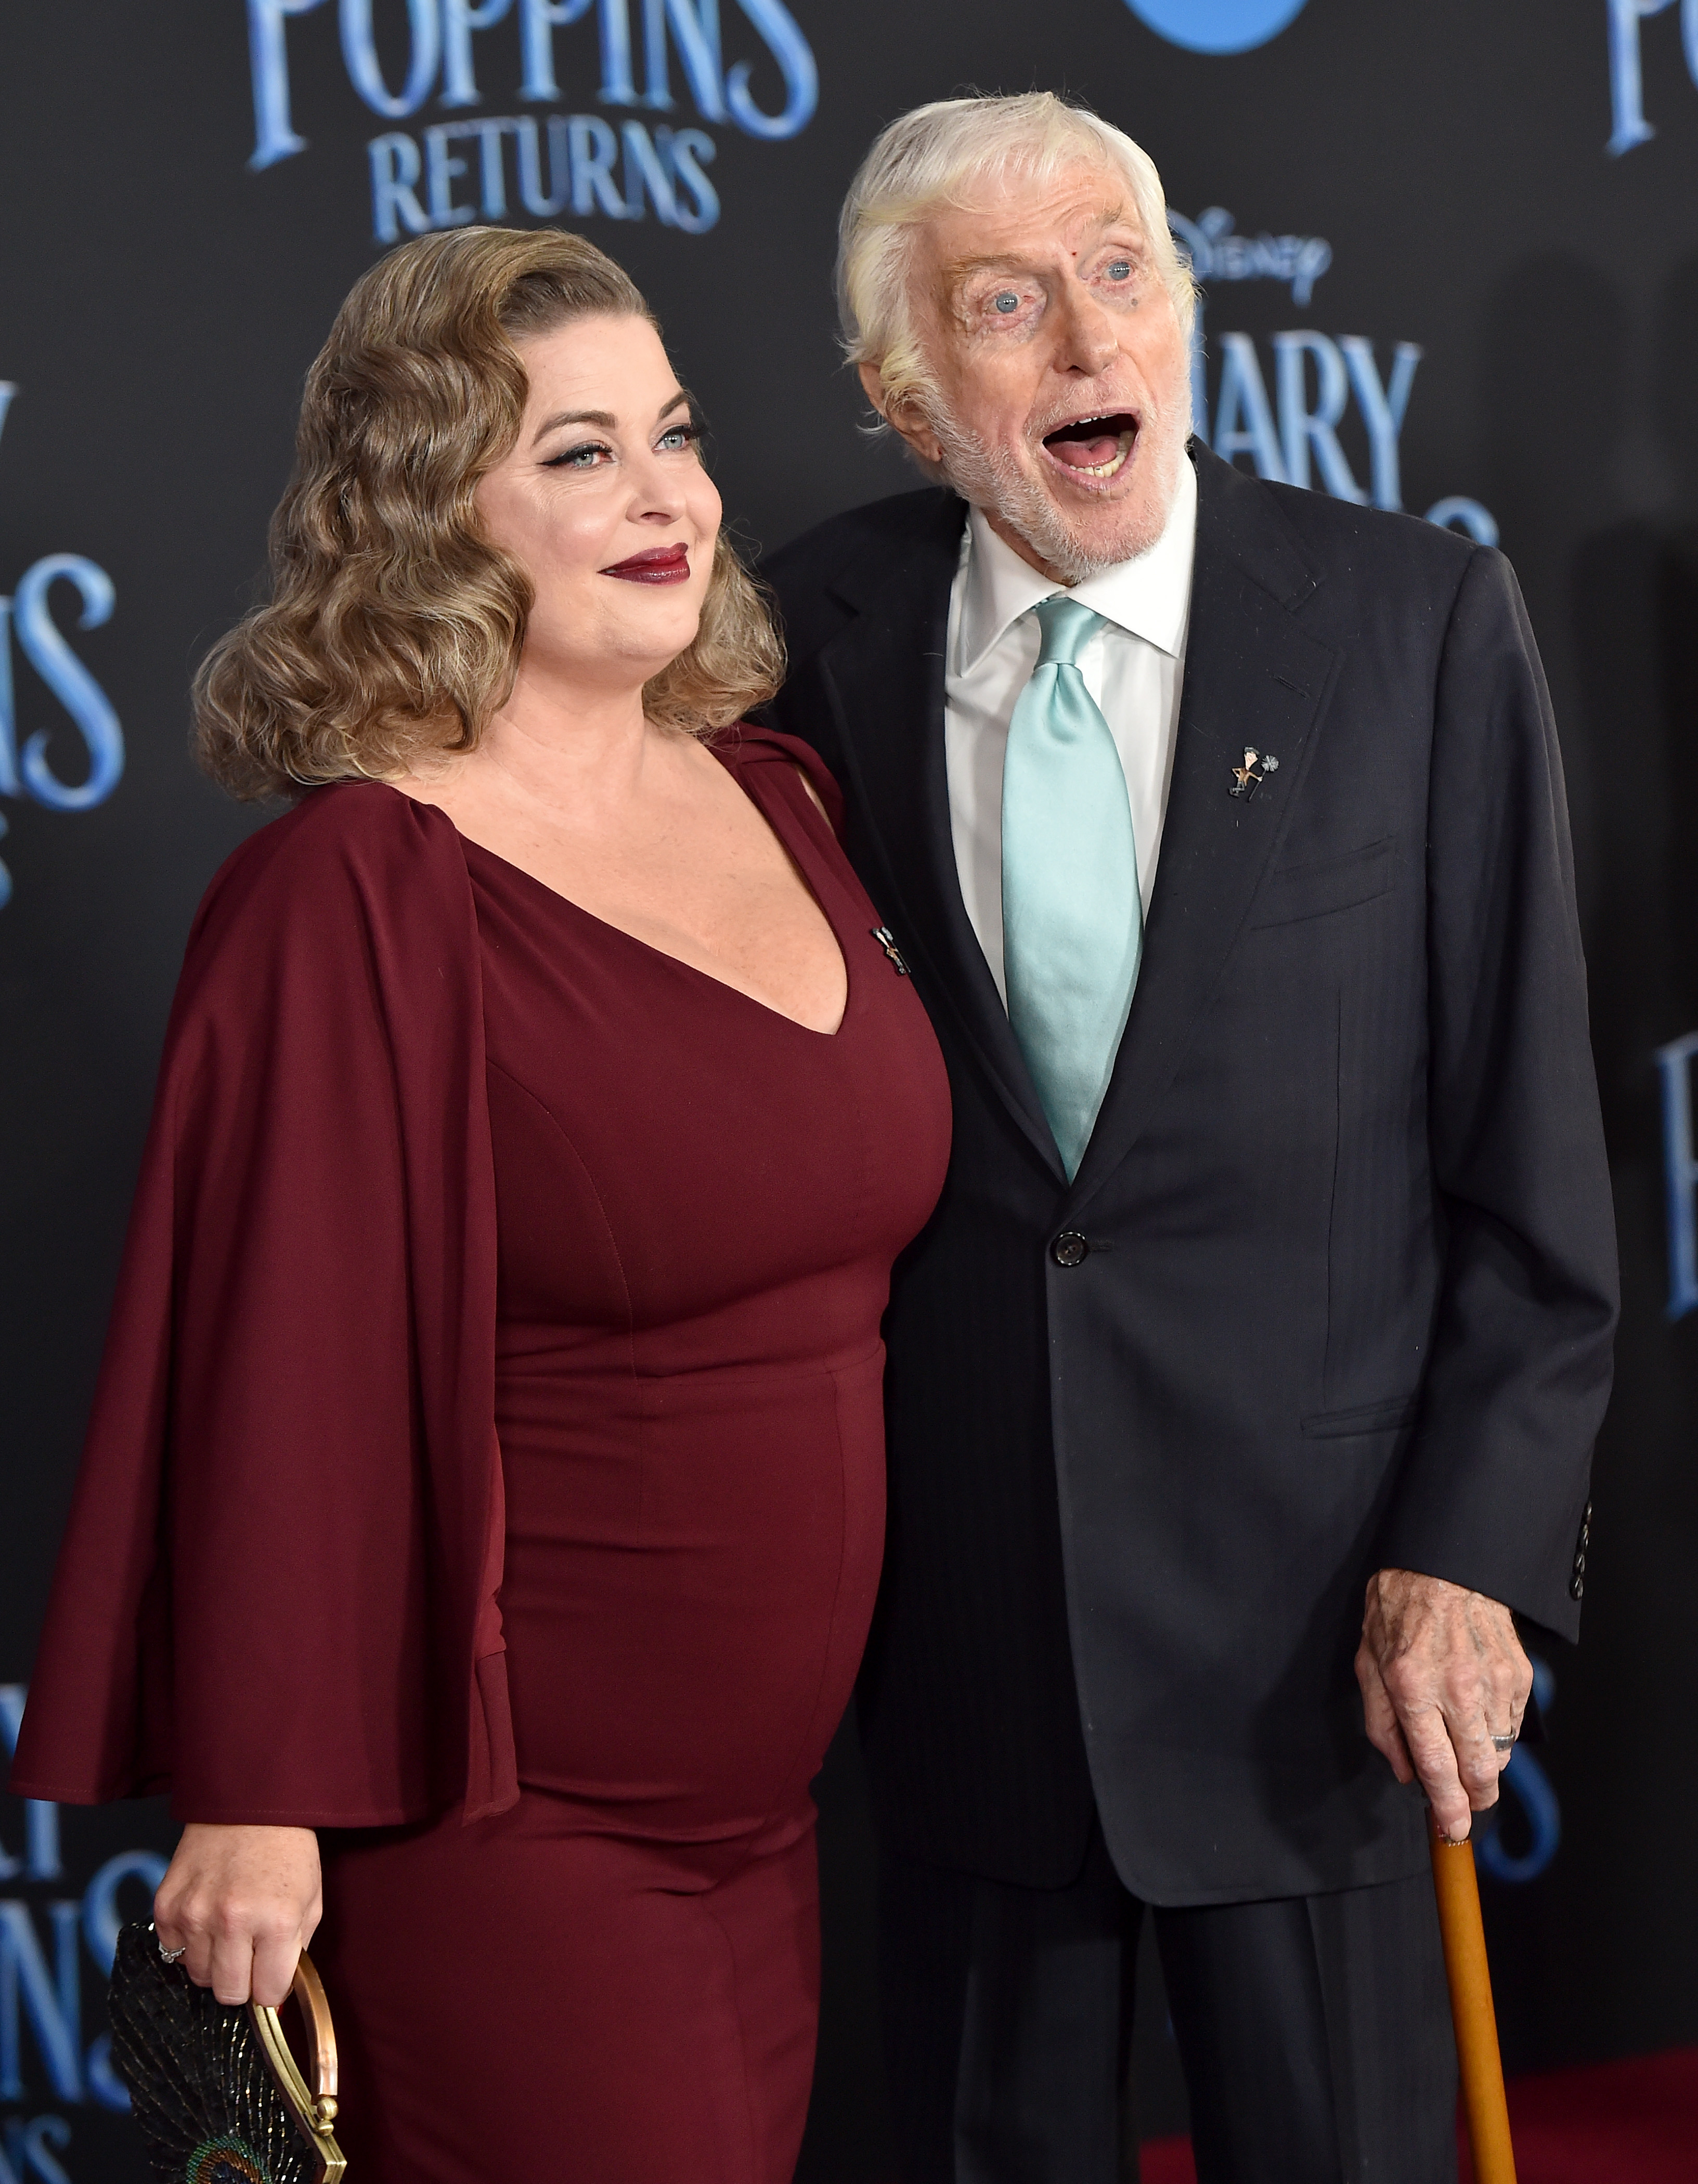 Arlene Silver and Dick Van Dyke at the "Mary Poppins Returns" Disney premiere in Los Angeles, 2018. | Source: Getty Images